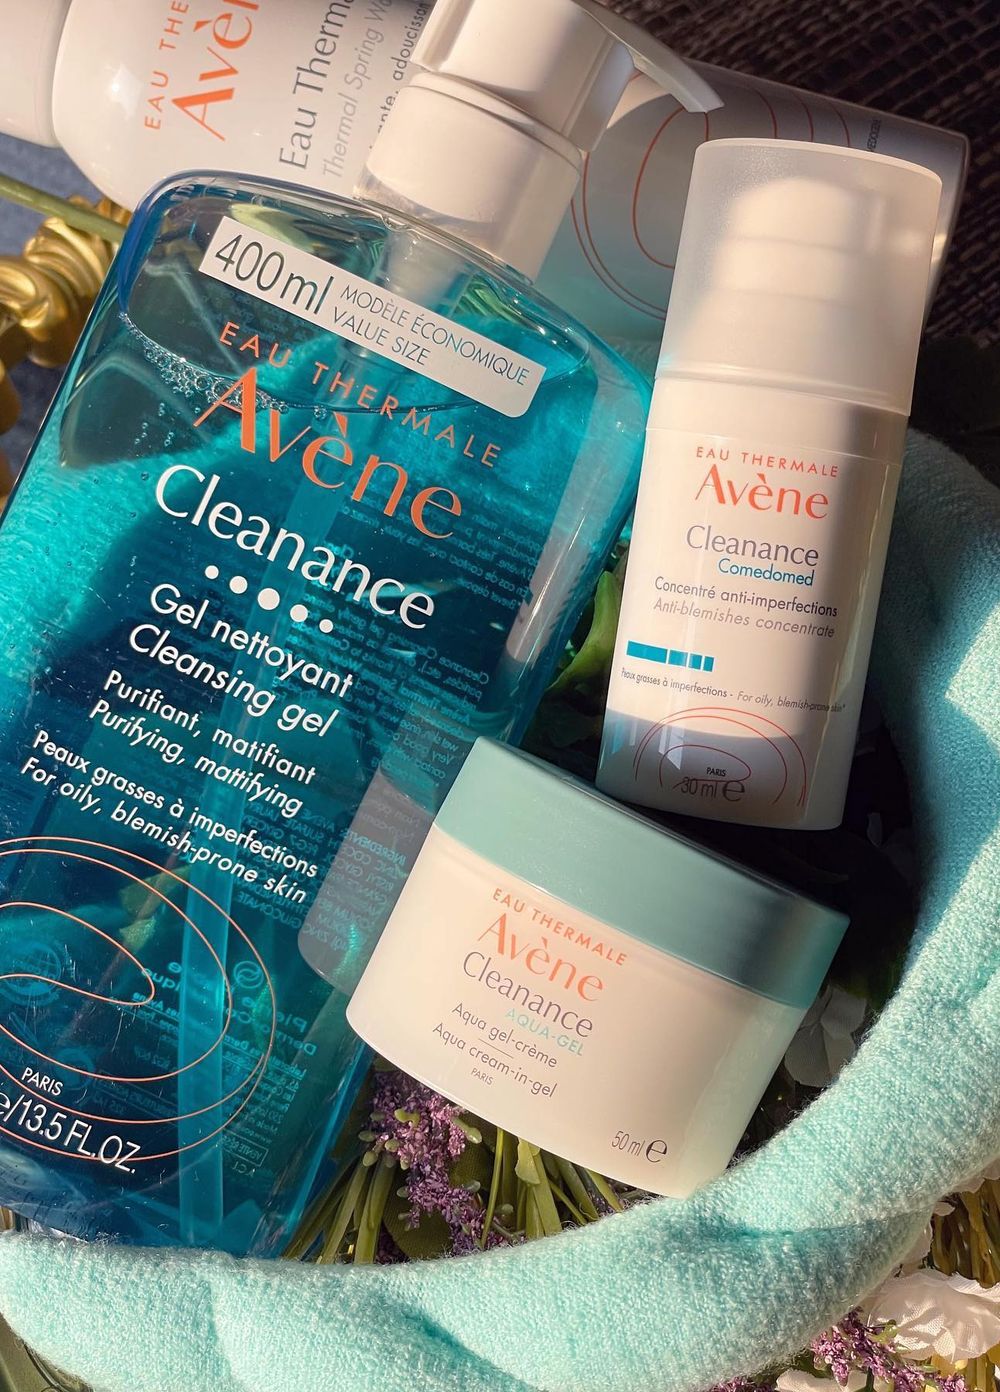 Avene Review: Read Before Buying this Pharmacy Brand